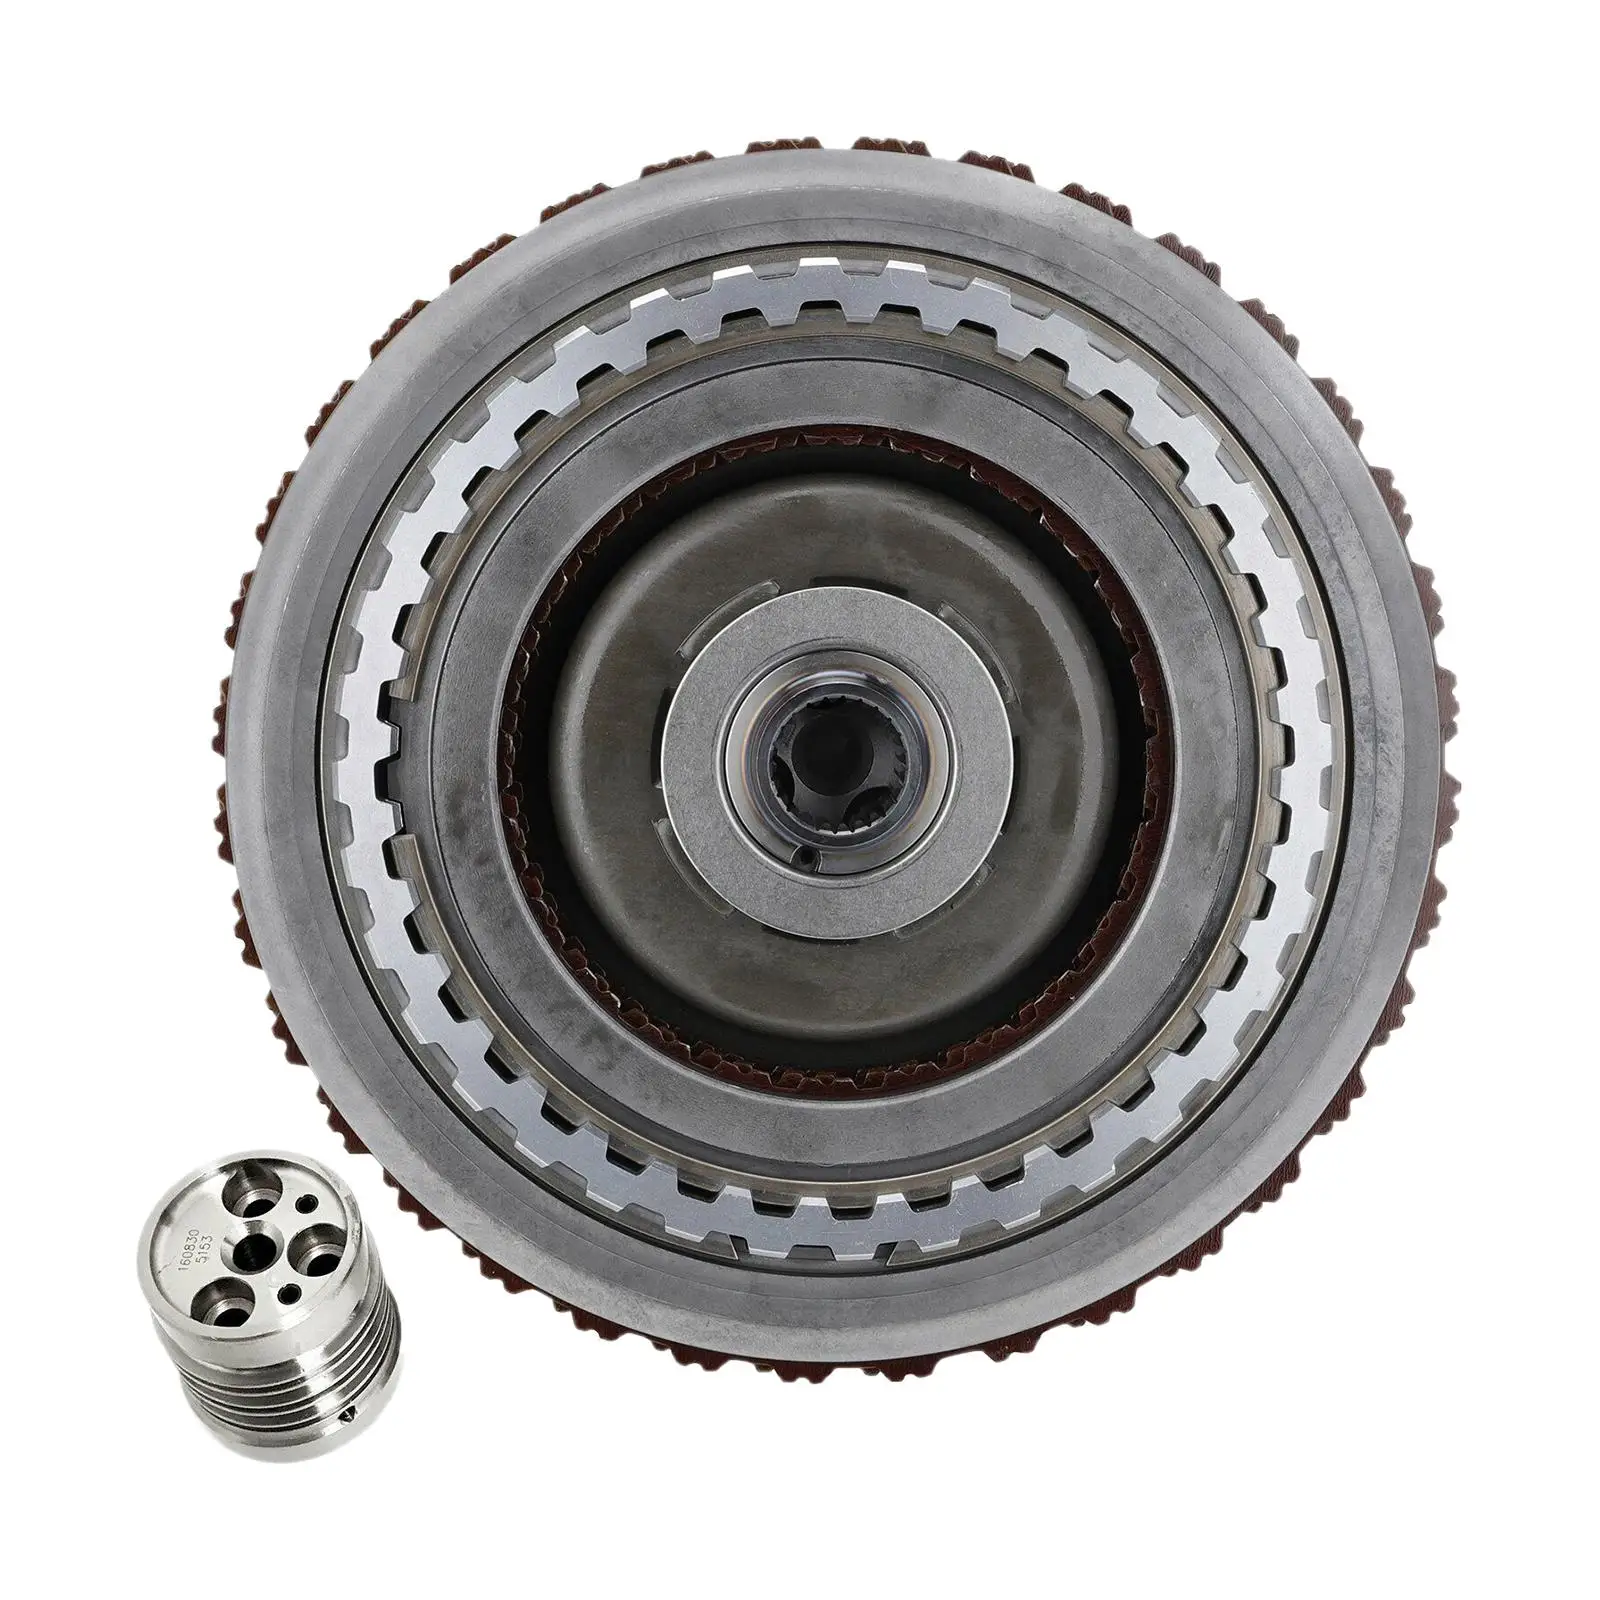 Transmission Clutch Assembly Input Drum for Chevrolet Replace Parts